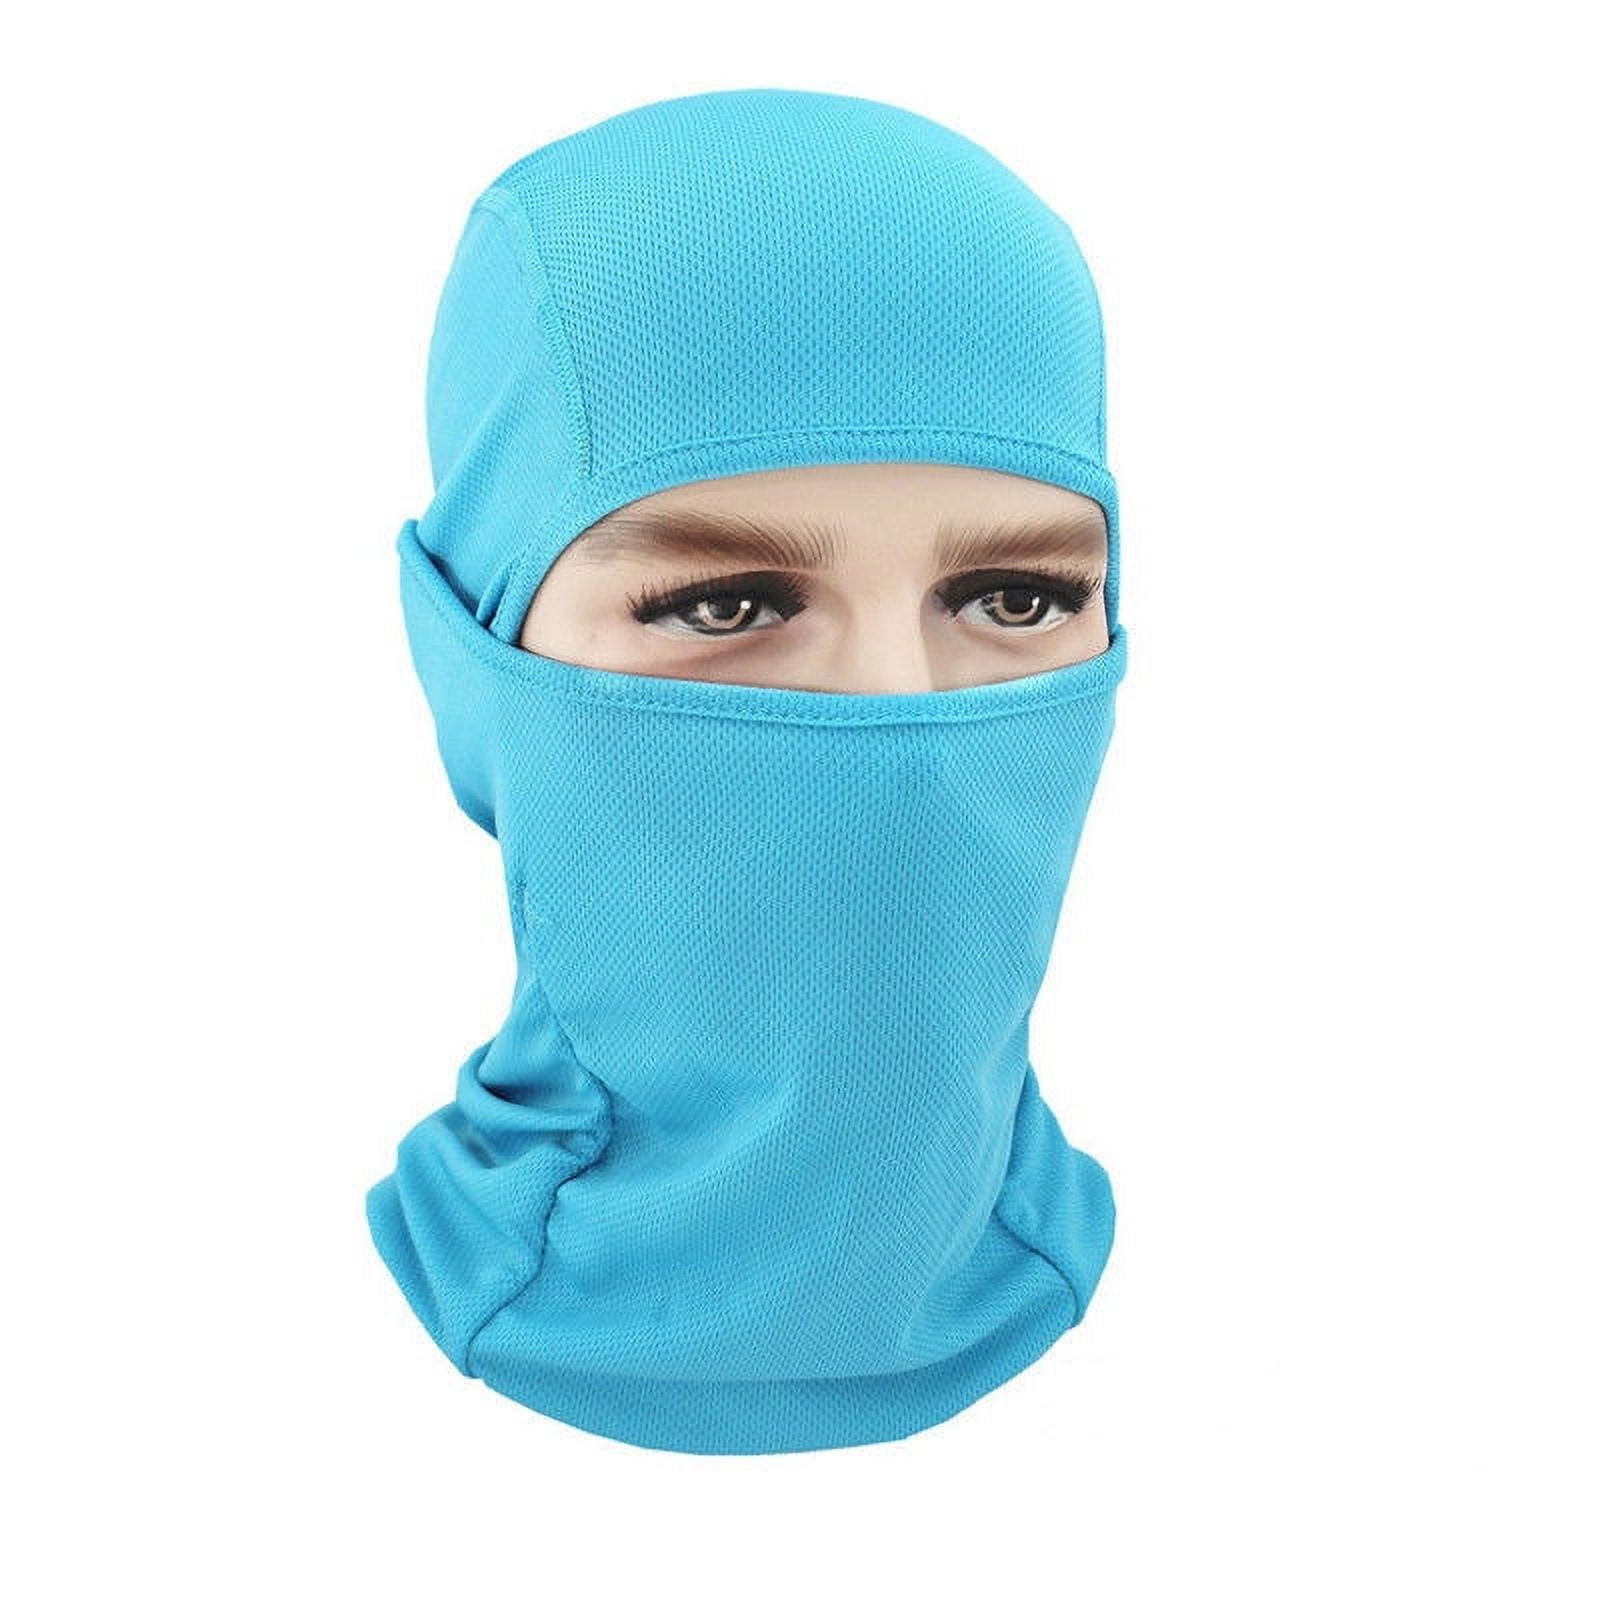 Balaclava Moto Face Mask Motorcycle Tactical Airsoft Paintball Cycling Bike  Ski Army Helmet Protection Full Face Mask From Carolinegirl, $14.58